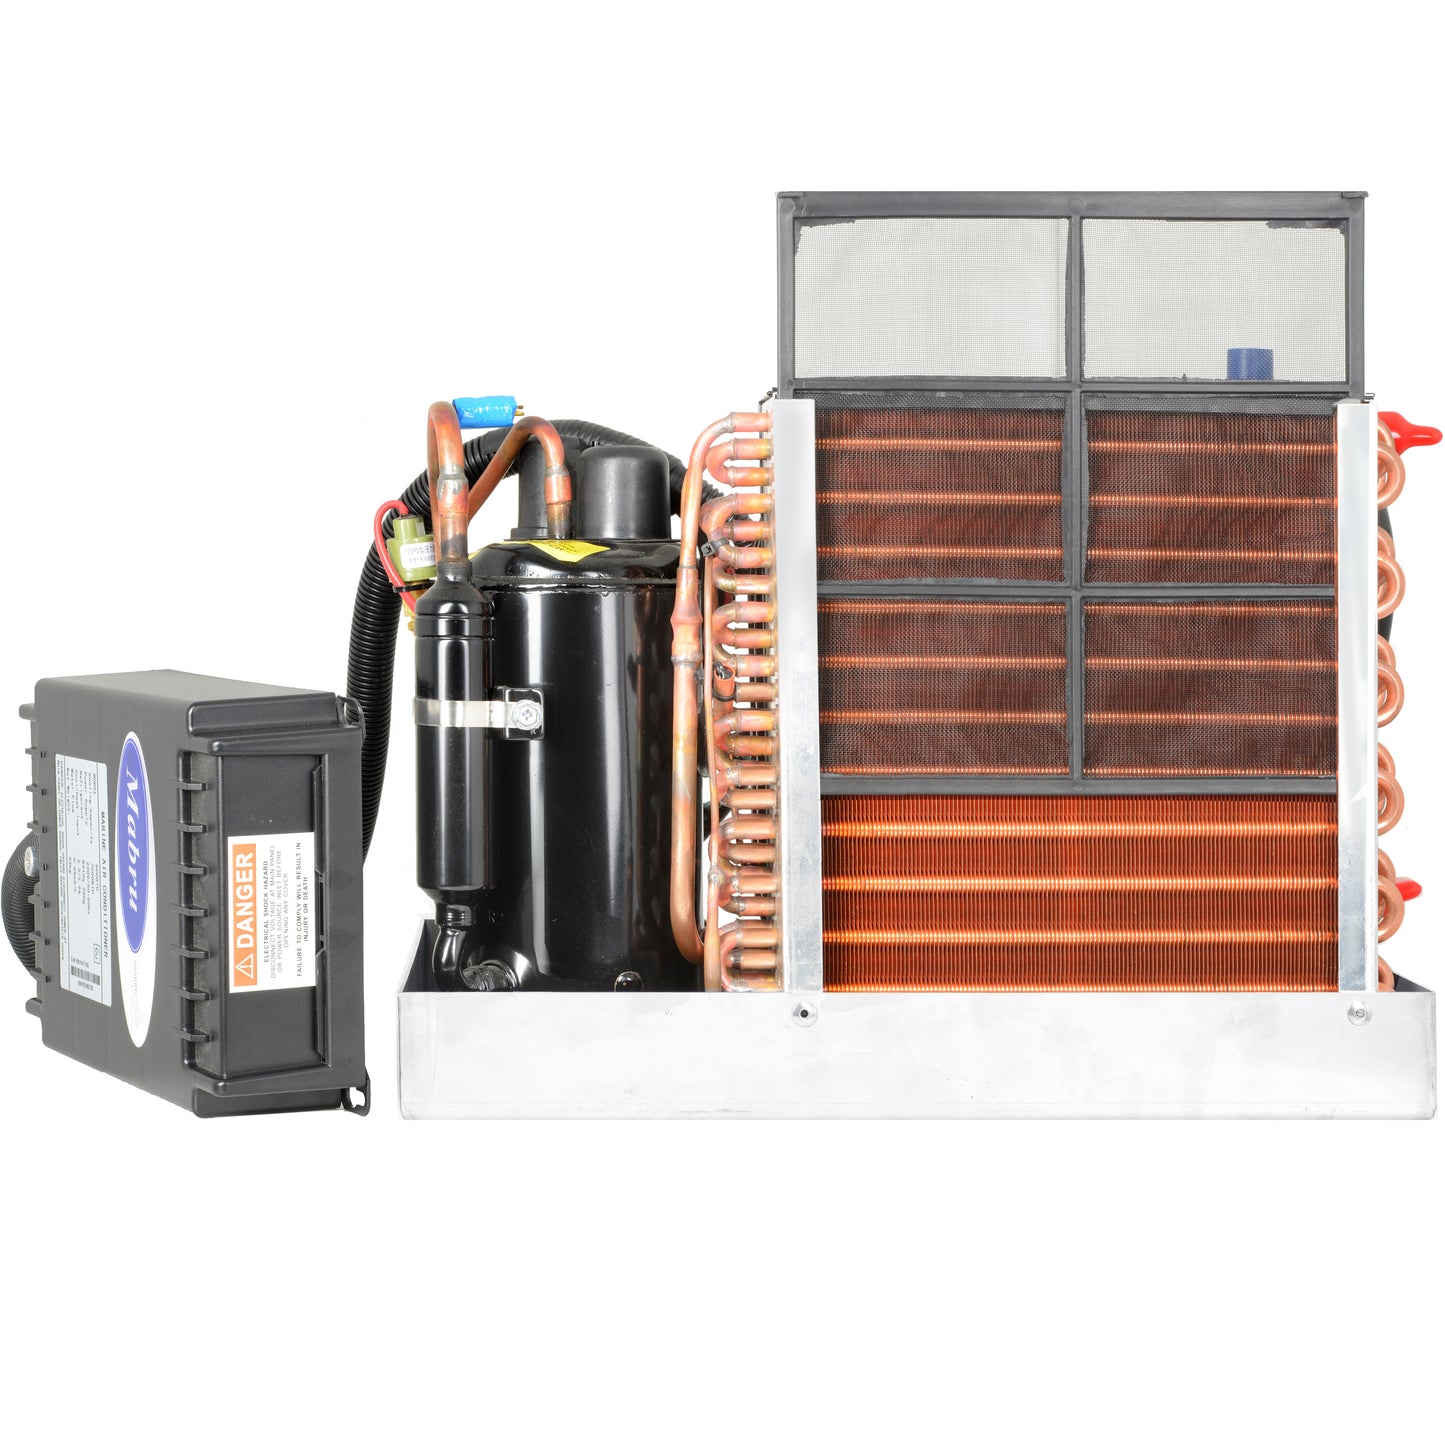 SELF-CONTAINED 7000 BTU 230V 50/60HZ MARINE AIR CONDITIONER COPPER FIN (HEATING AND COOLING) by MABRU